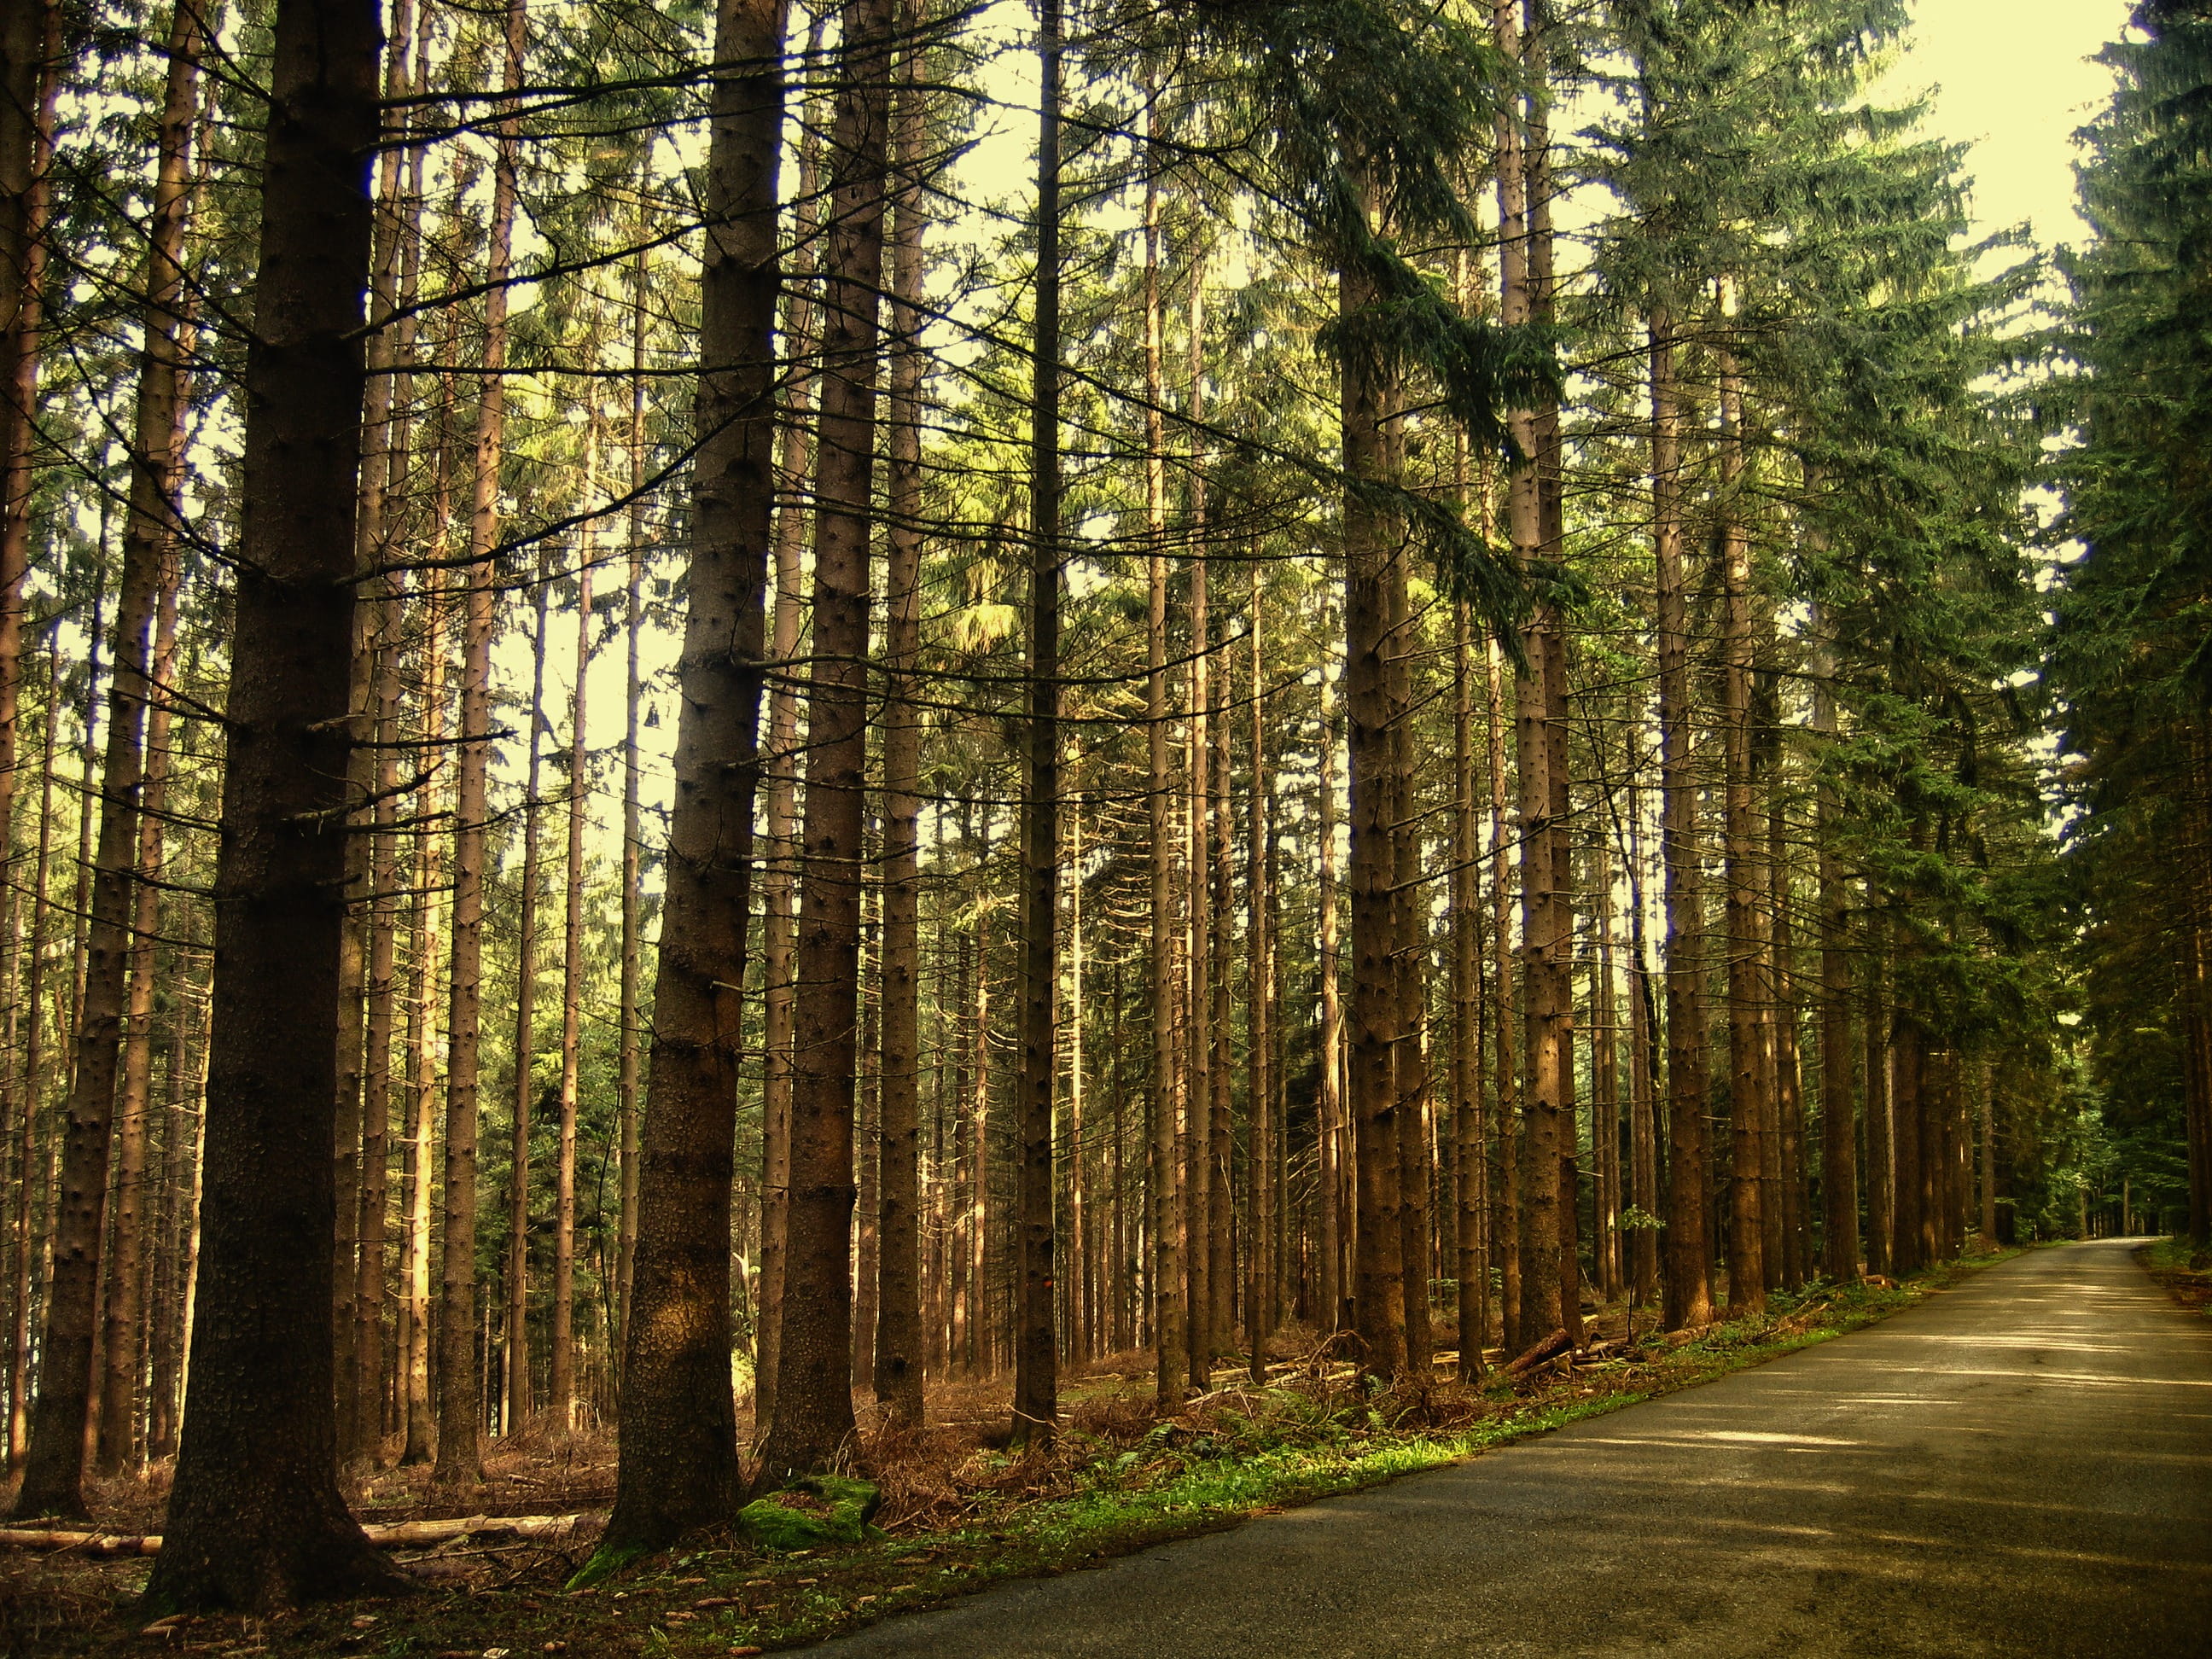 landscape shot of trees near road during daytime, forest, firs